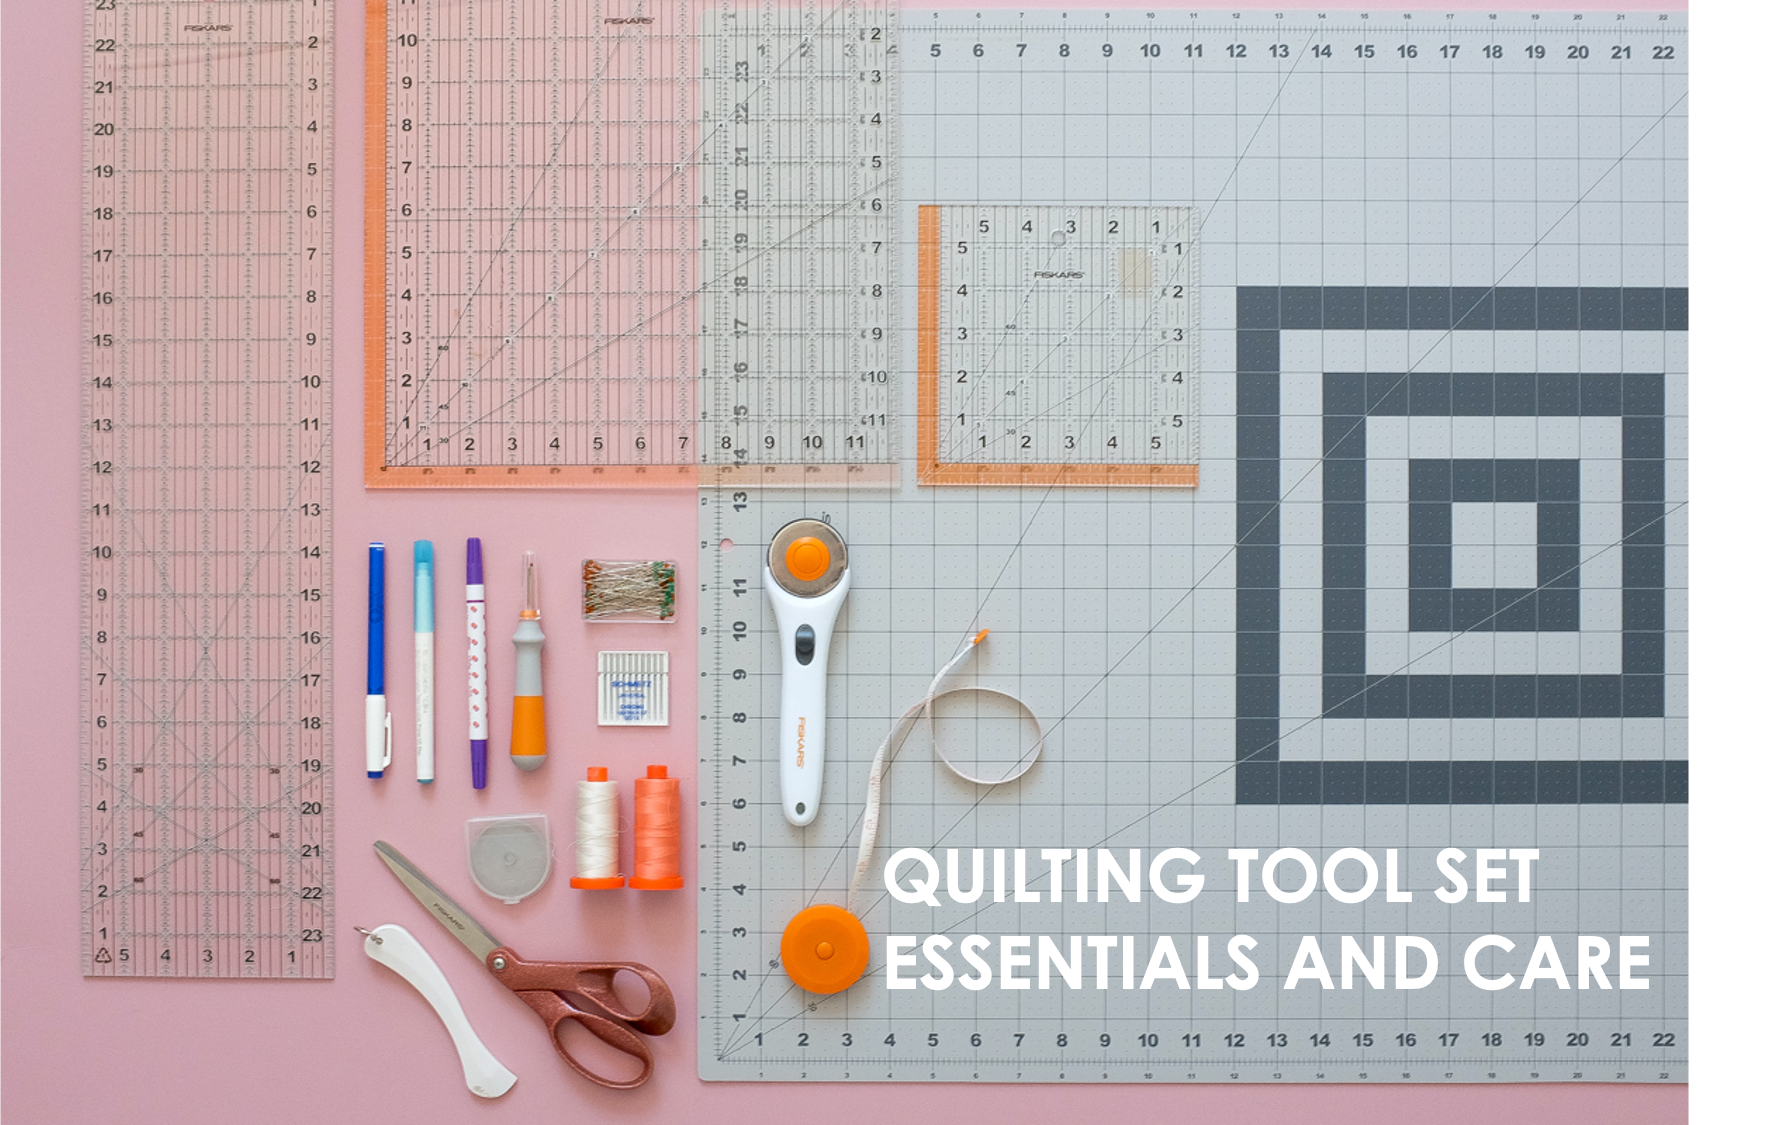 Quilting Tool Set Essentials and Care blog post by The Weekend Quilter Wendy Chow Fiskars brand partner